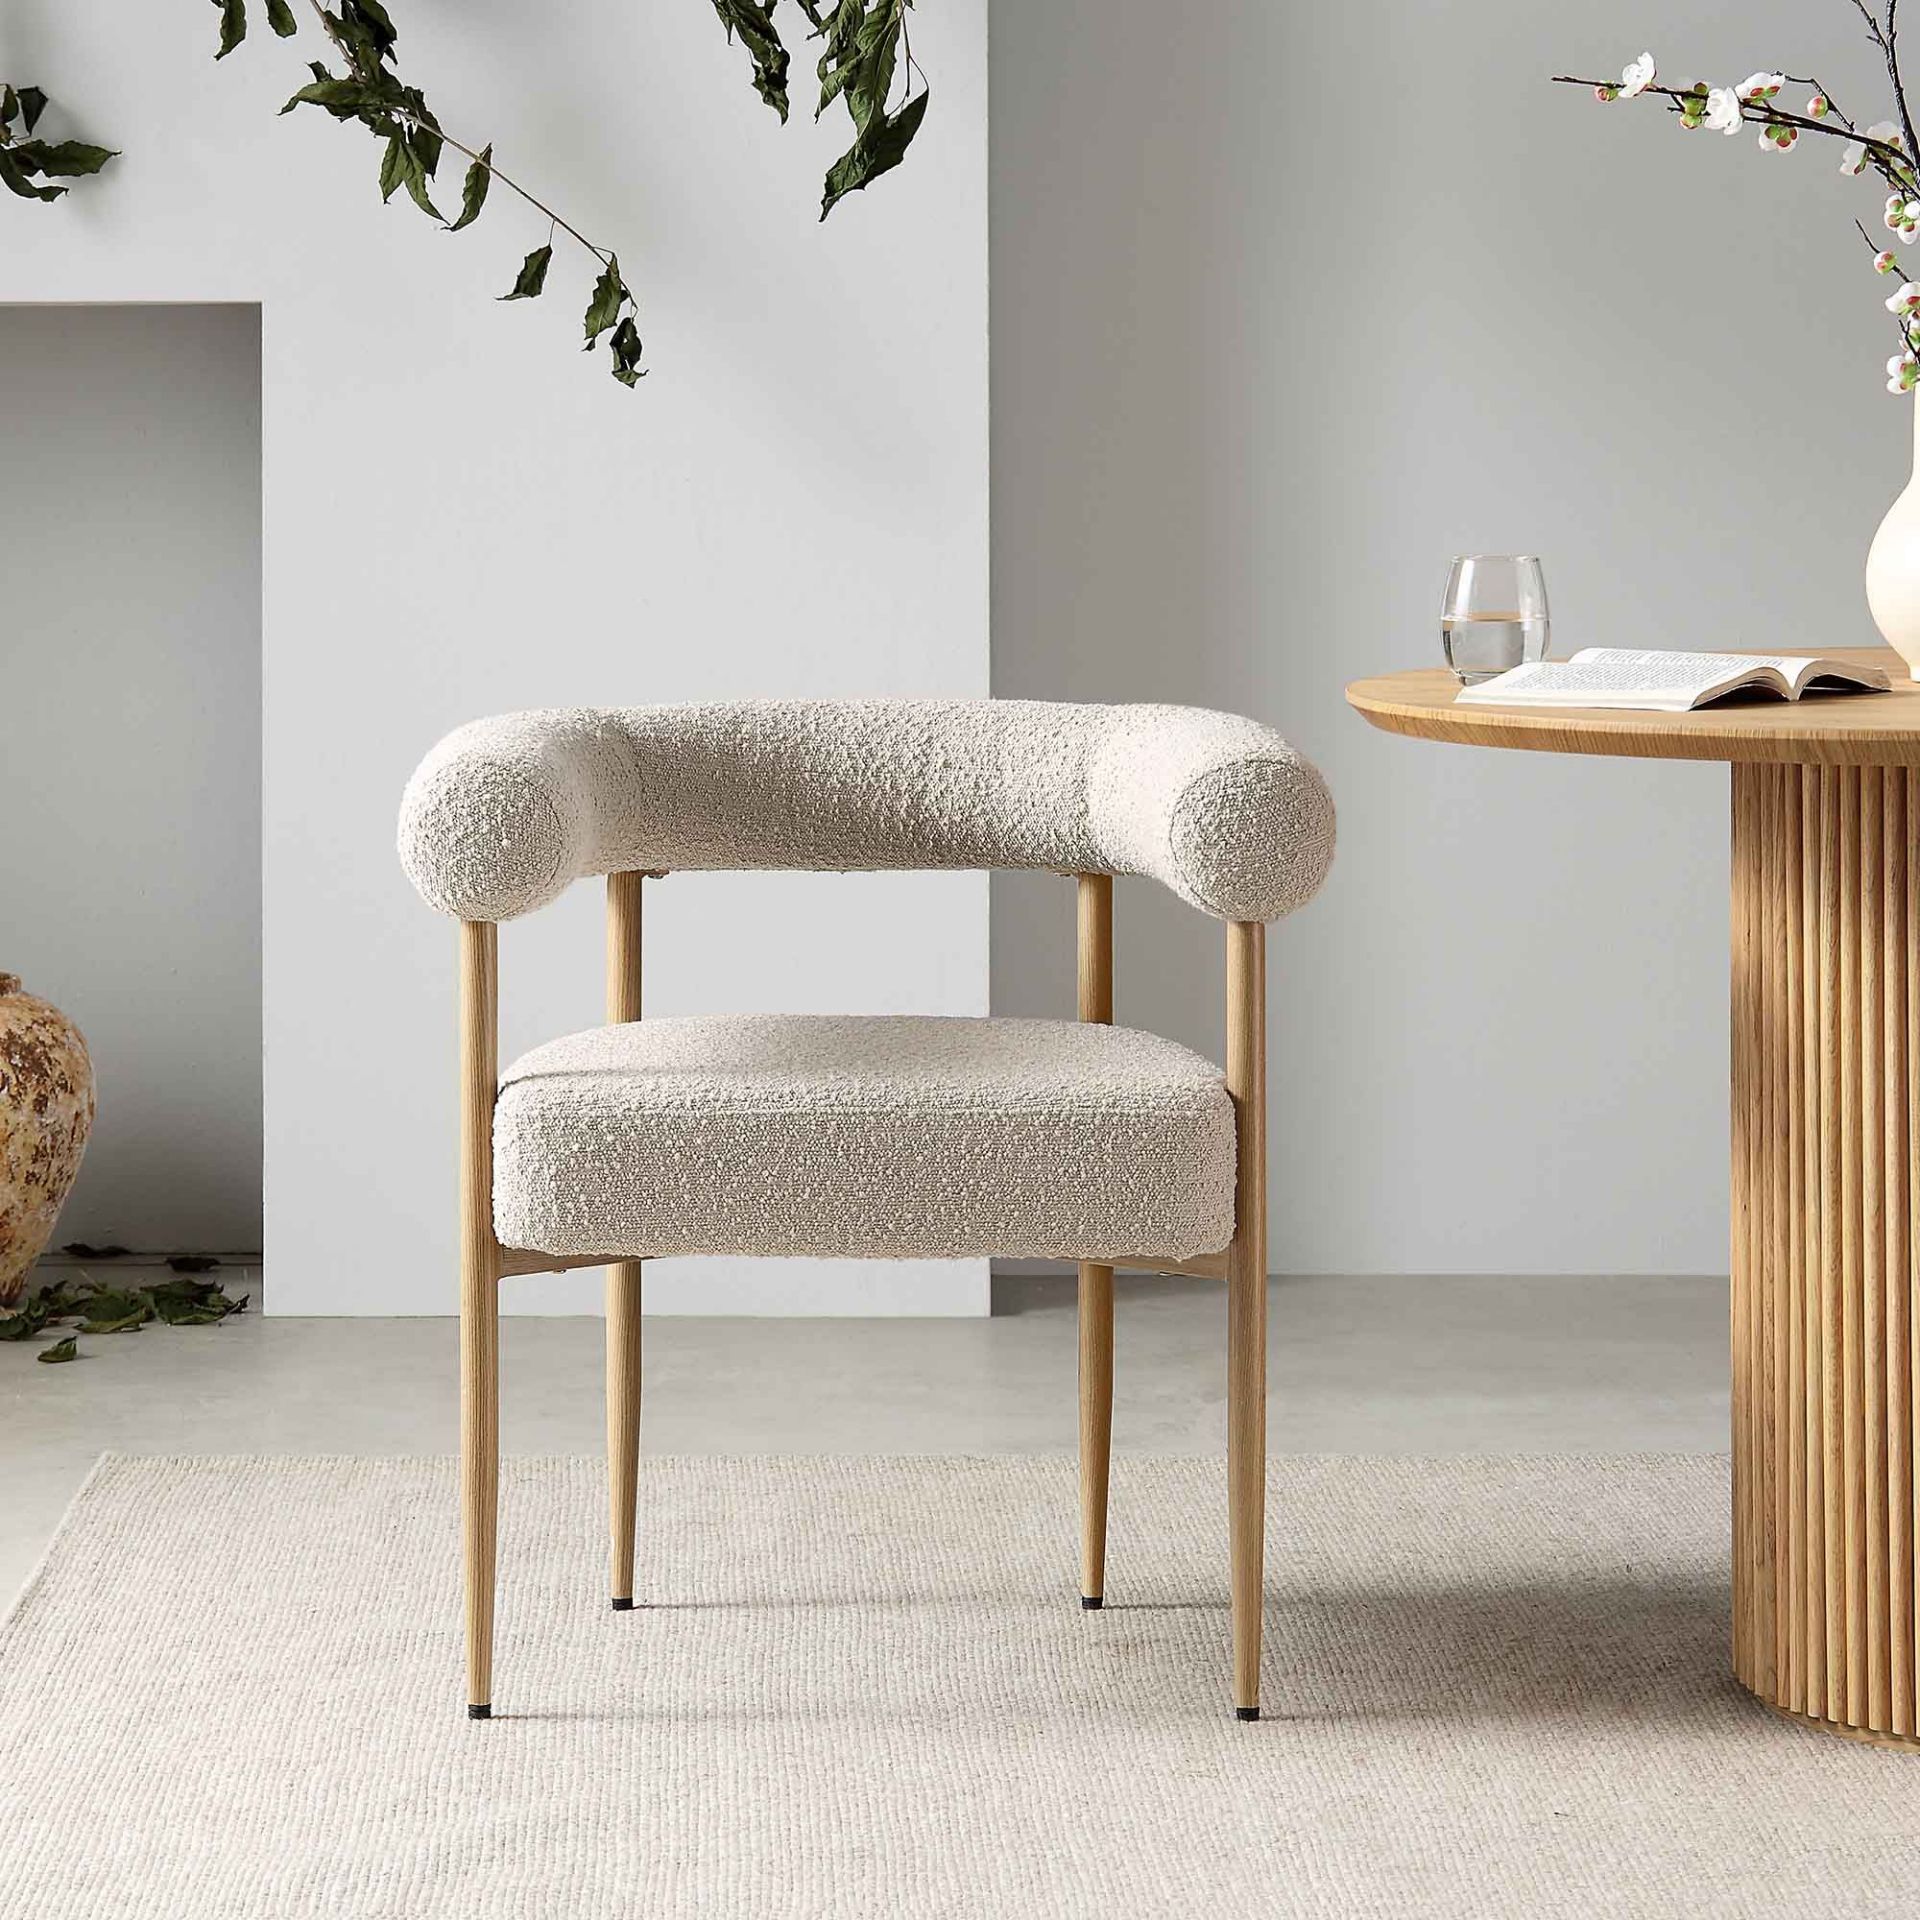 Fulbourn Taupe Boucle Dining Chair with Natural Wood Effect Legs. - R19.5. RRP £209.99. Well-